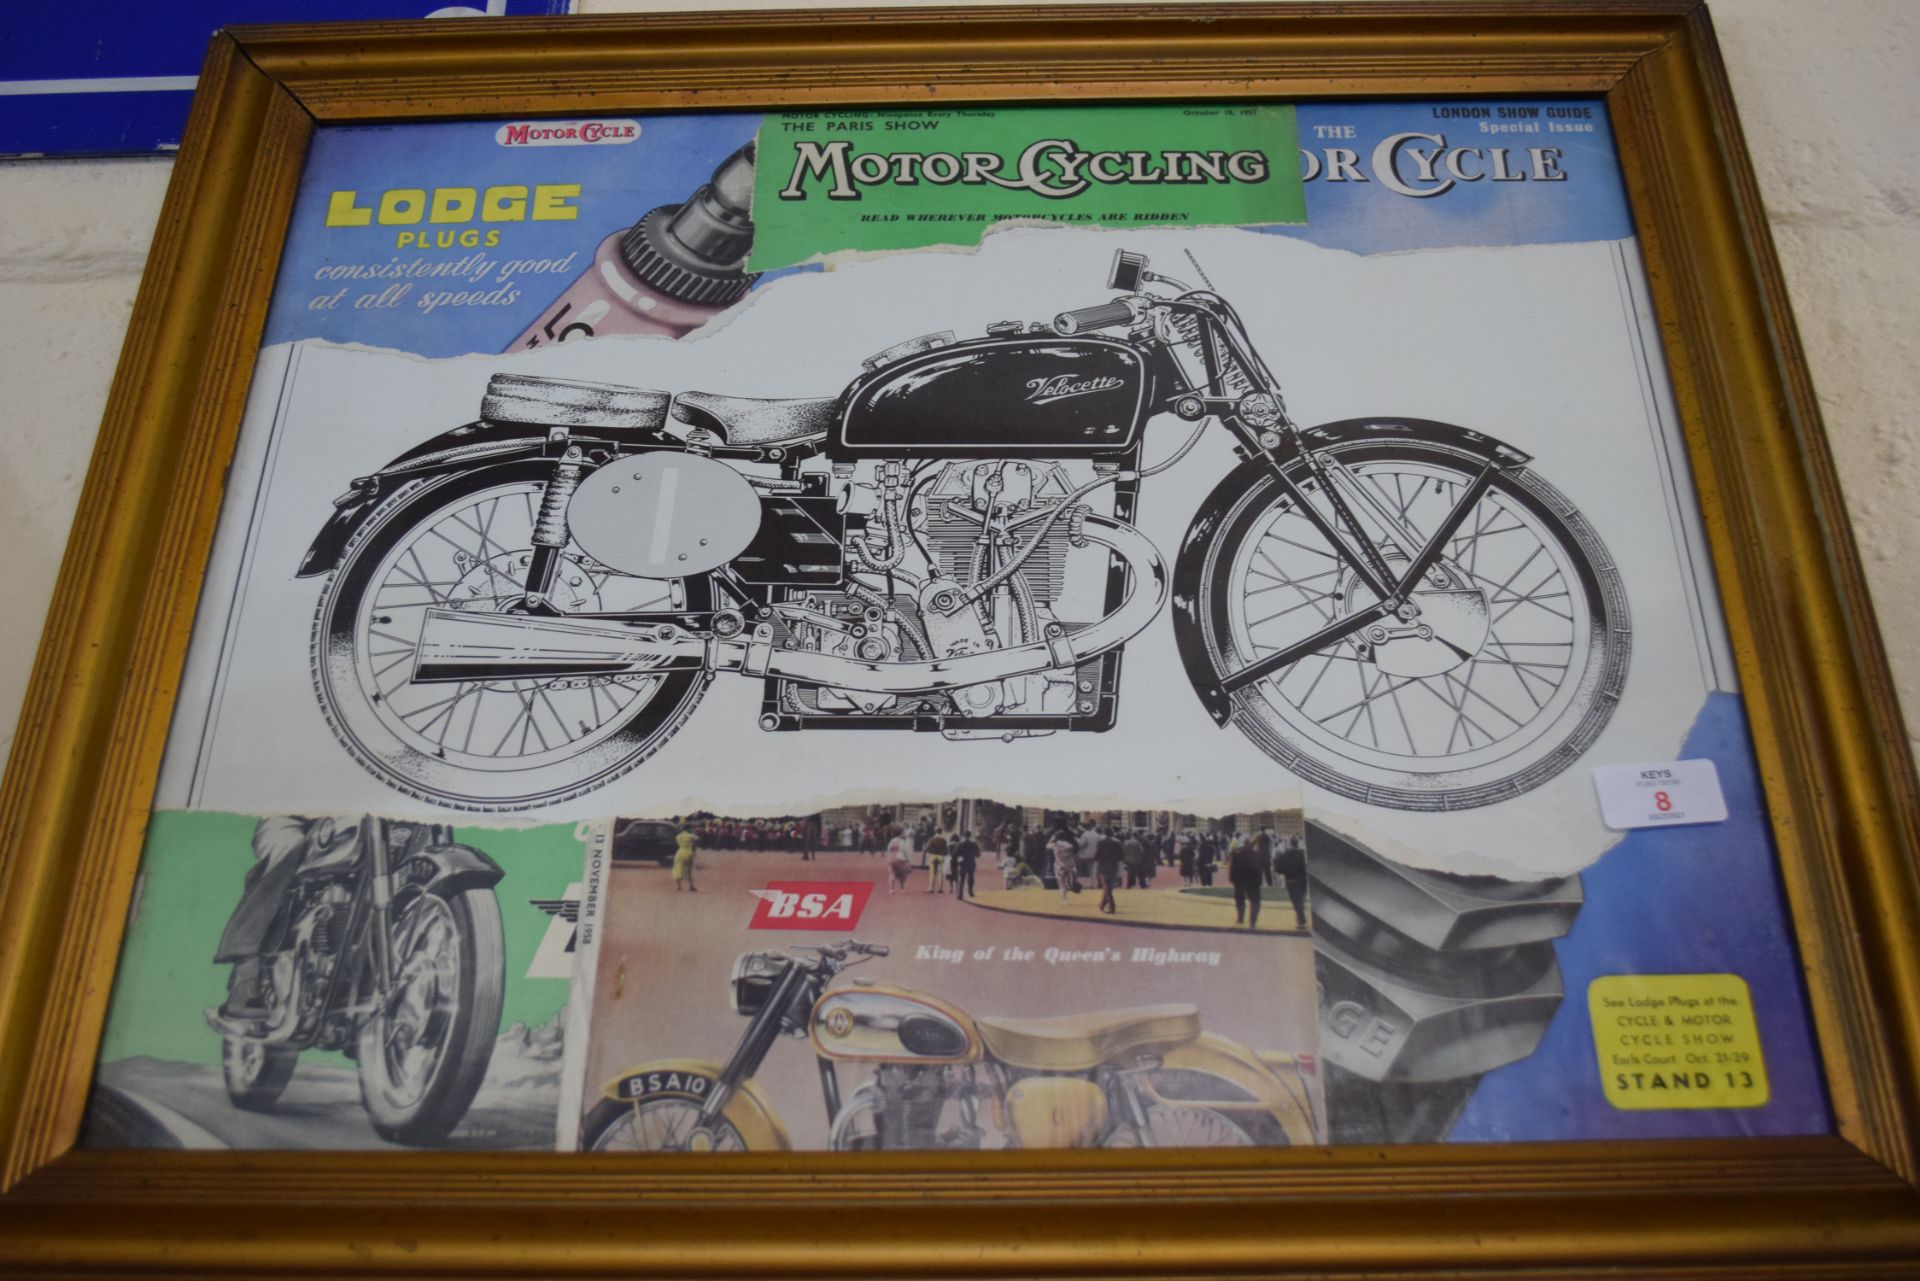 Framed motorcycle interest print, various clippings from magazines